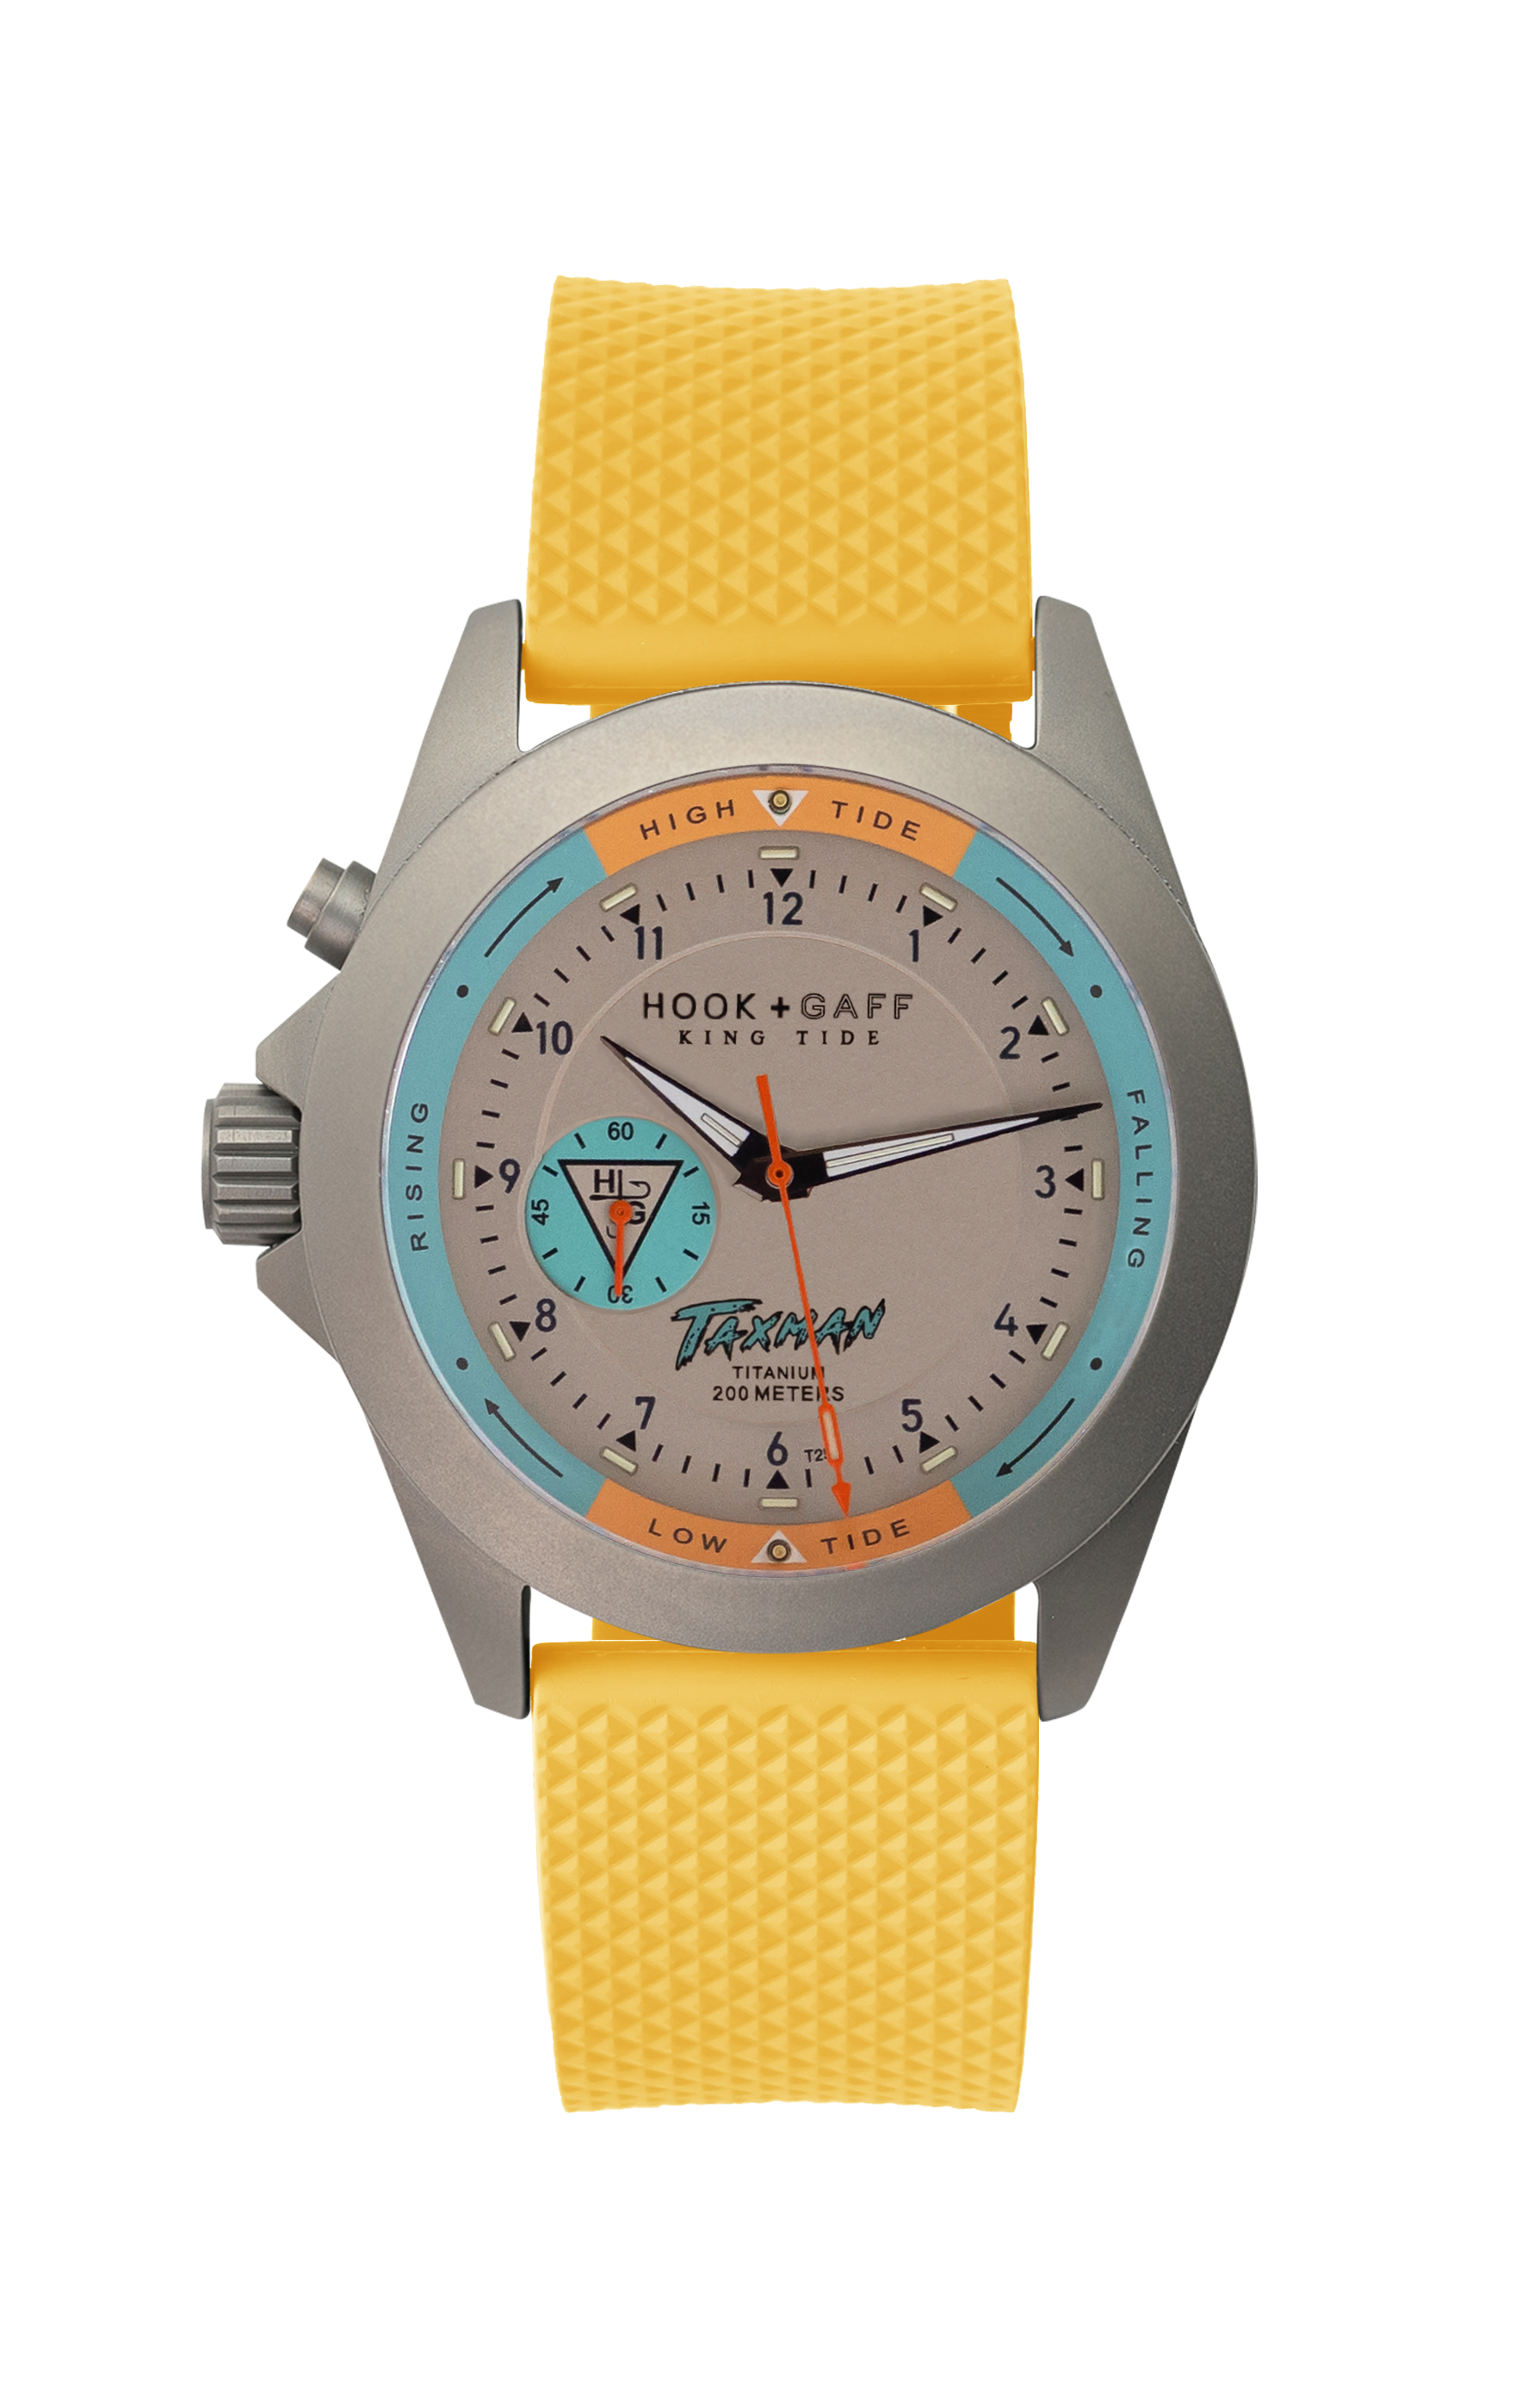 New! King Tide Watch - Gray Dial